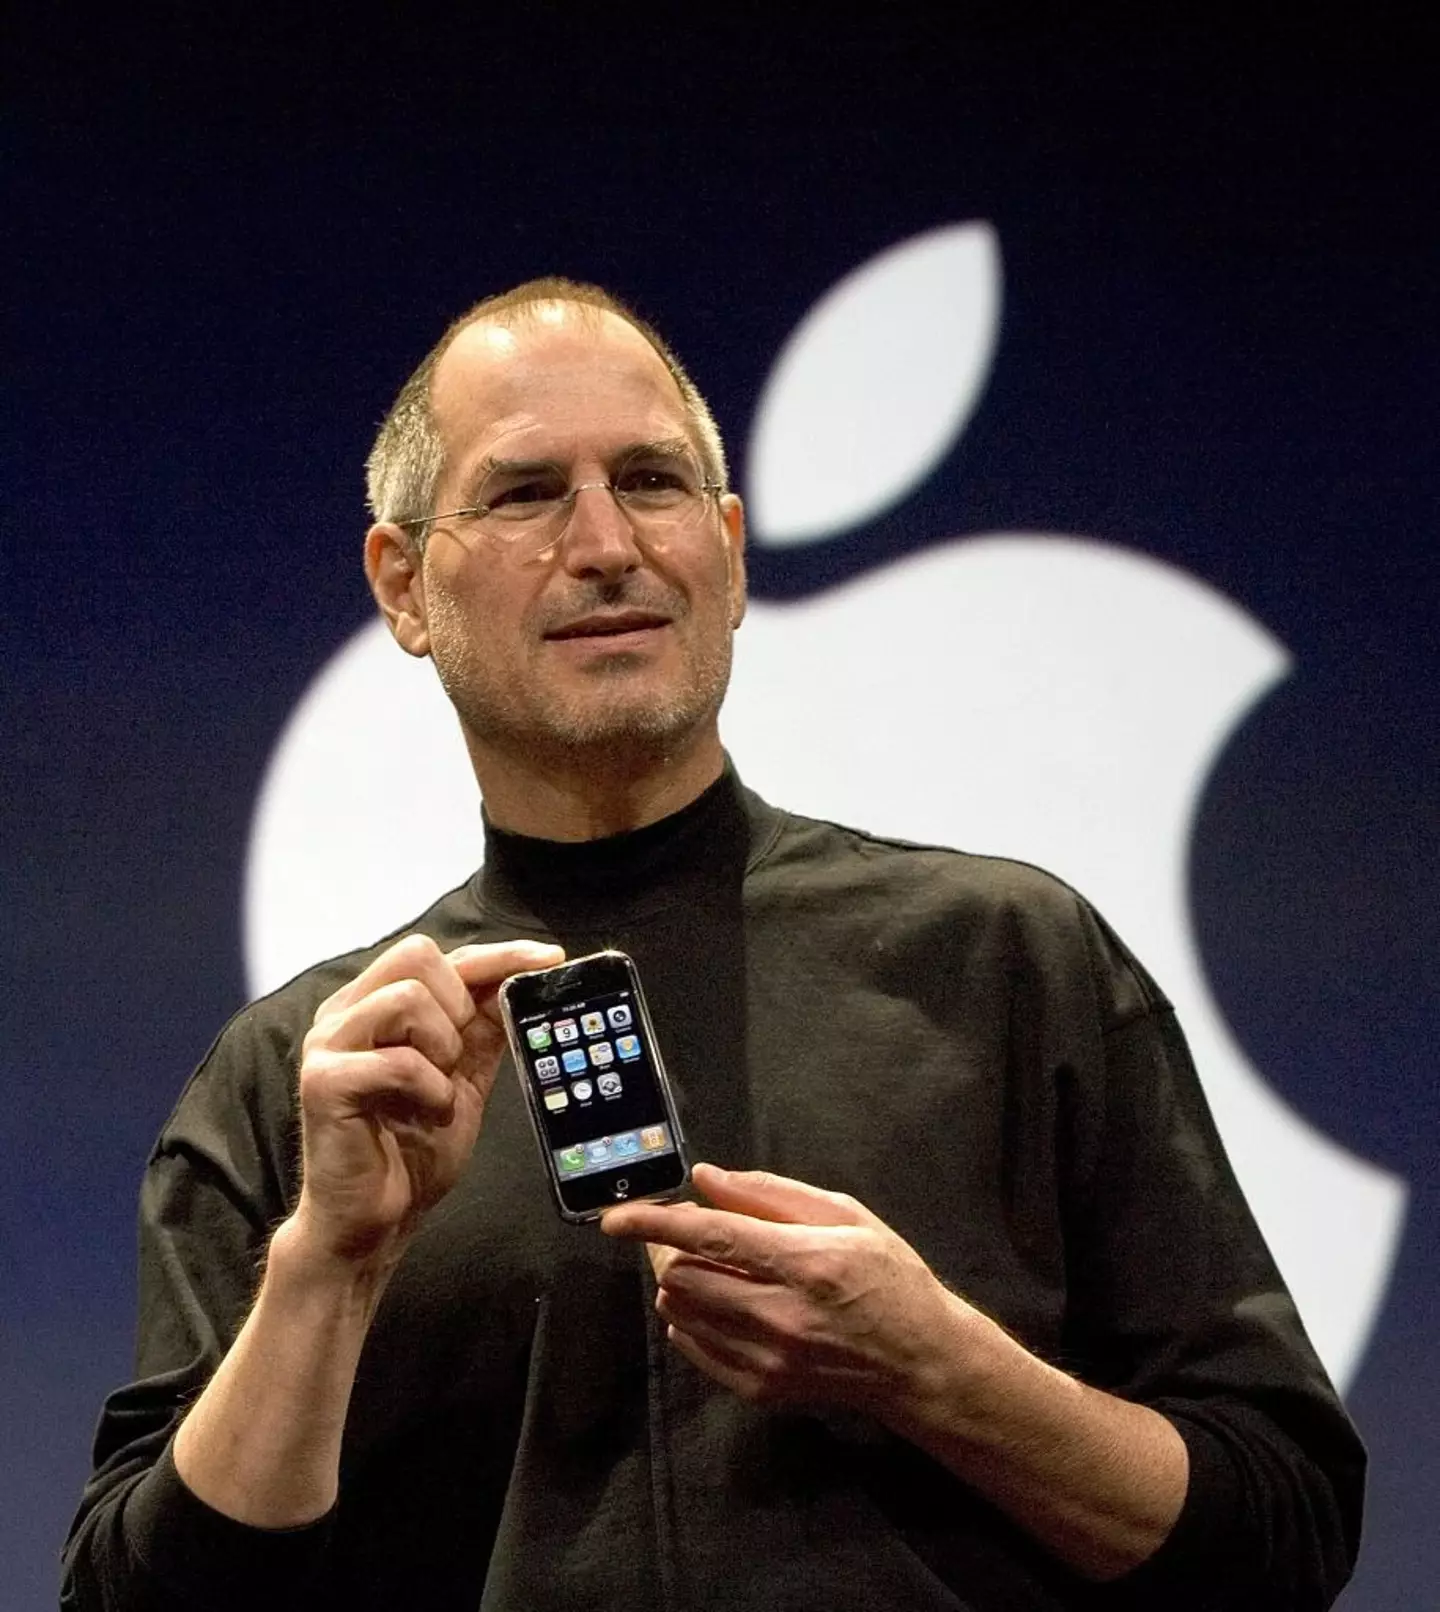 Steve Jobs presented the first iPhone in January 2007, and it was released in June that year.